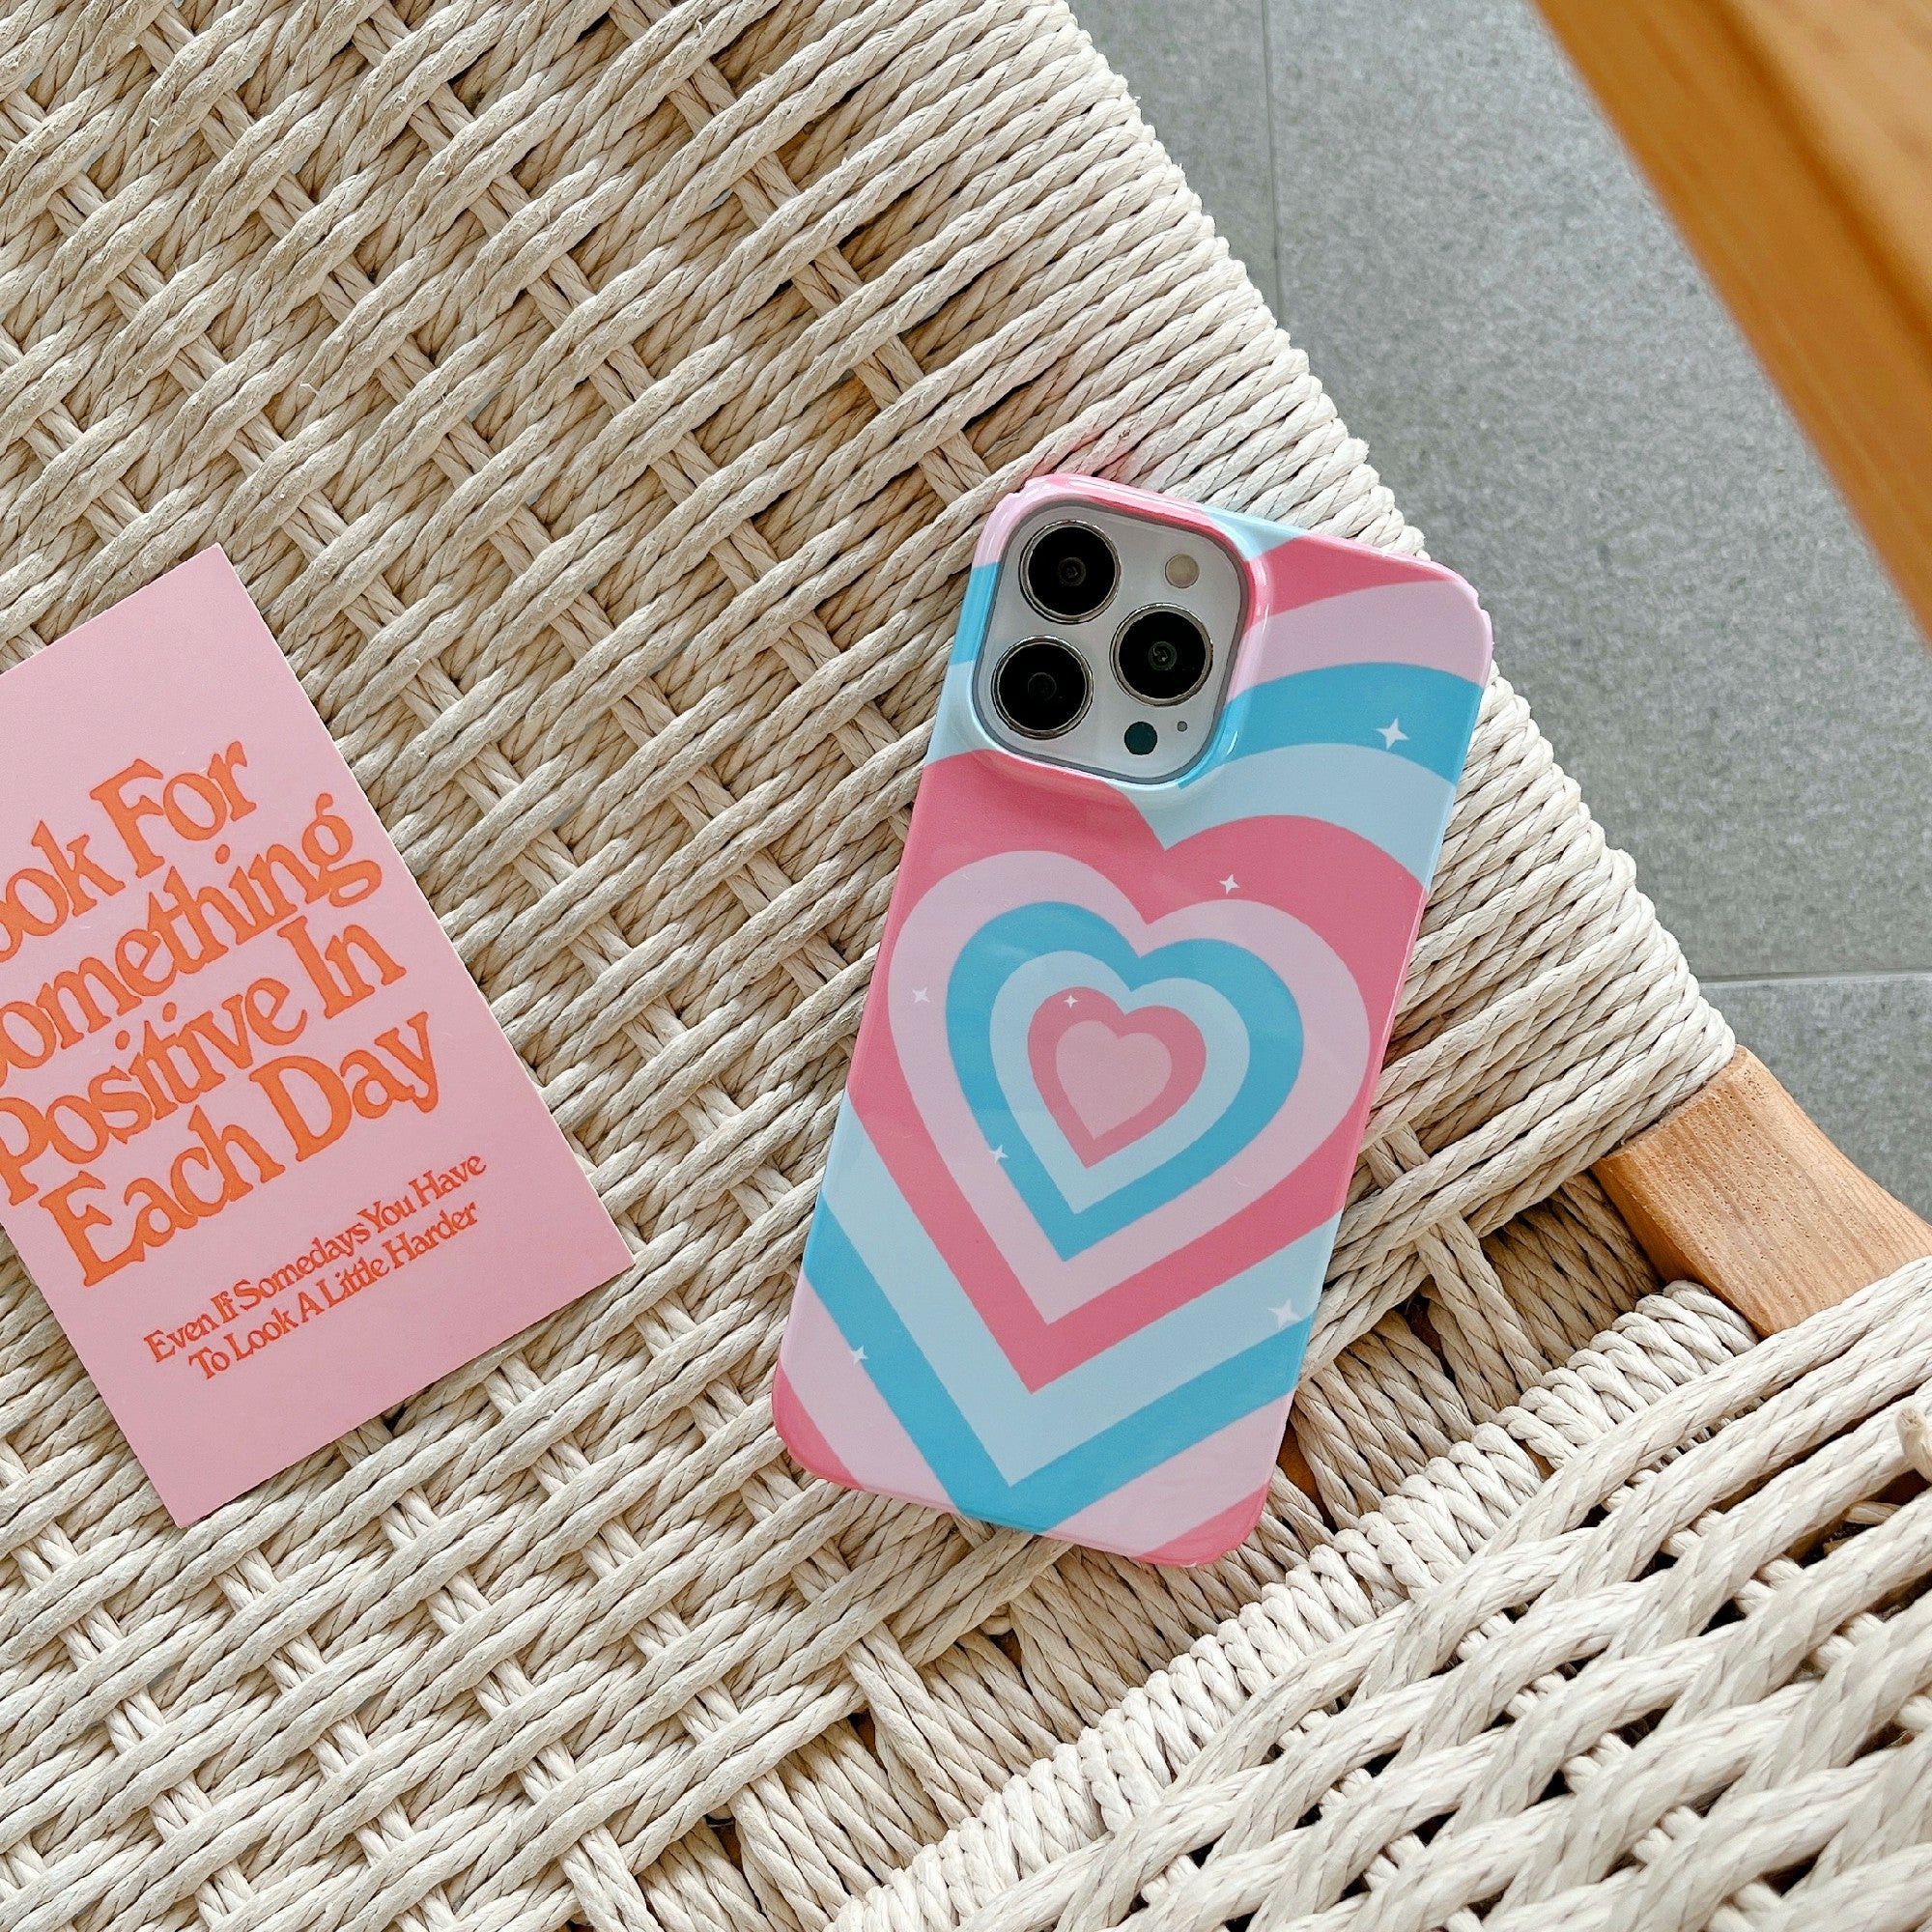 Uniqkart for iPhone 12 Pro Max 6.7 inch Hard PC Phone Case Pattern Printing Protective Glossy Phone Shell - Pink Blue Heart